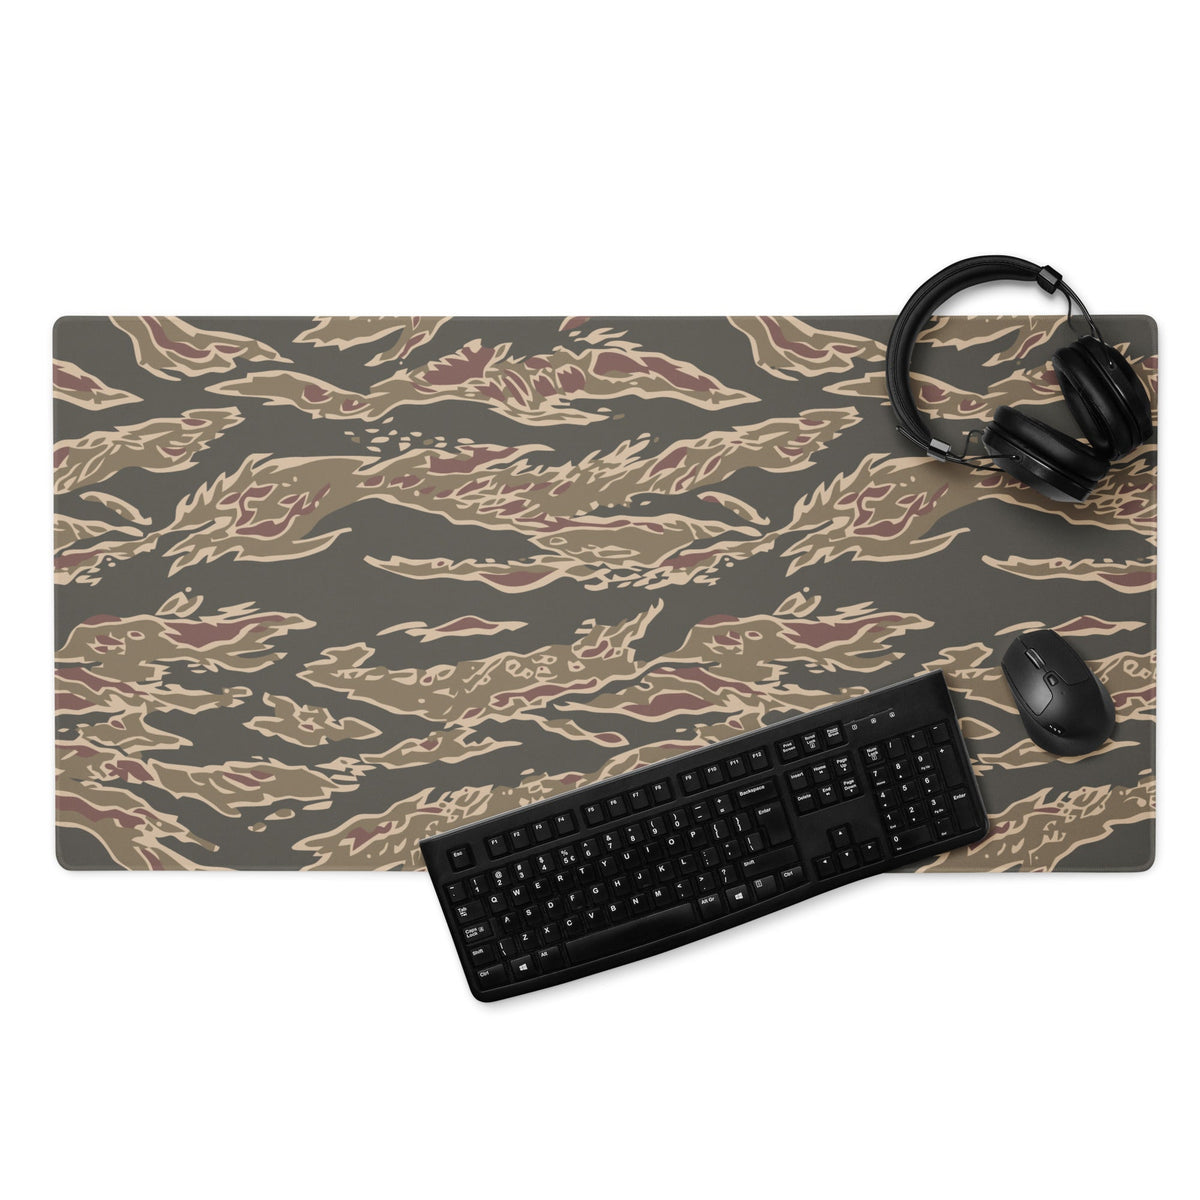 Taiwan Special Forces Red Tiger Stripe CAMO Gaming mouse pad - 36″×18″